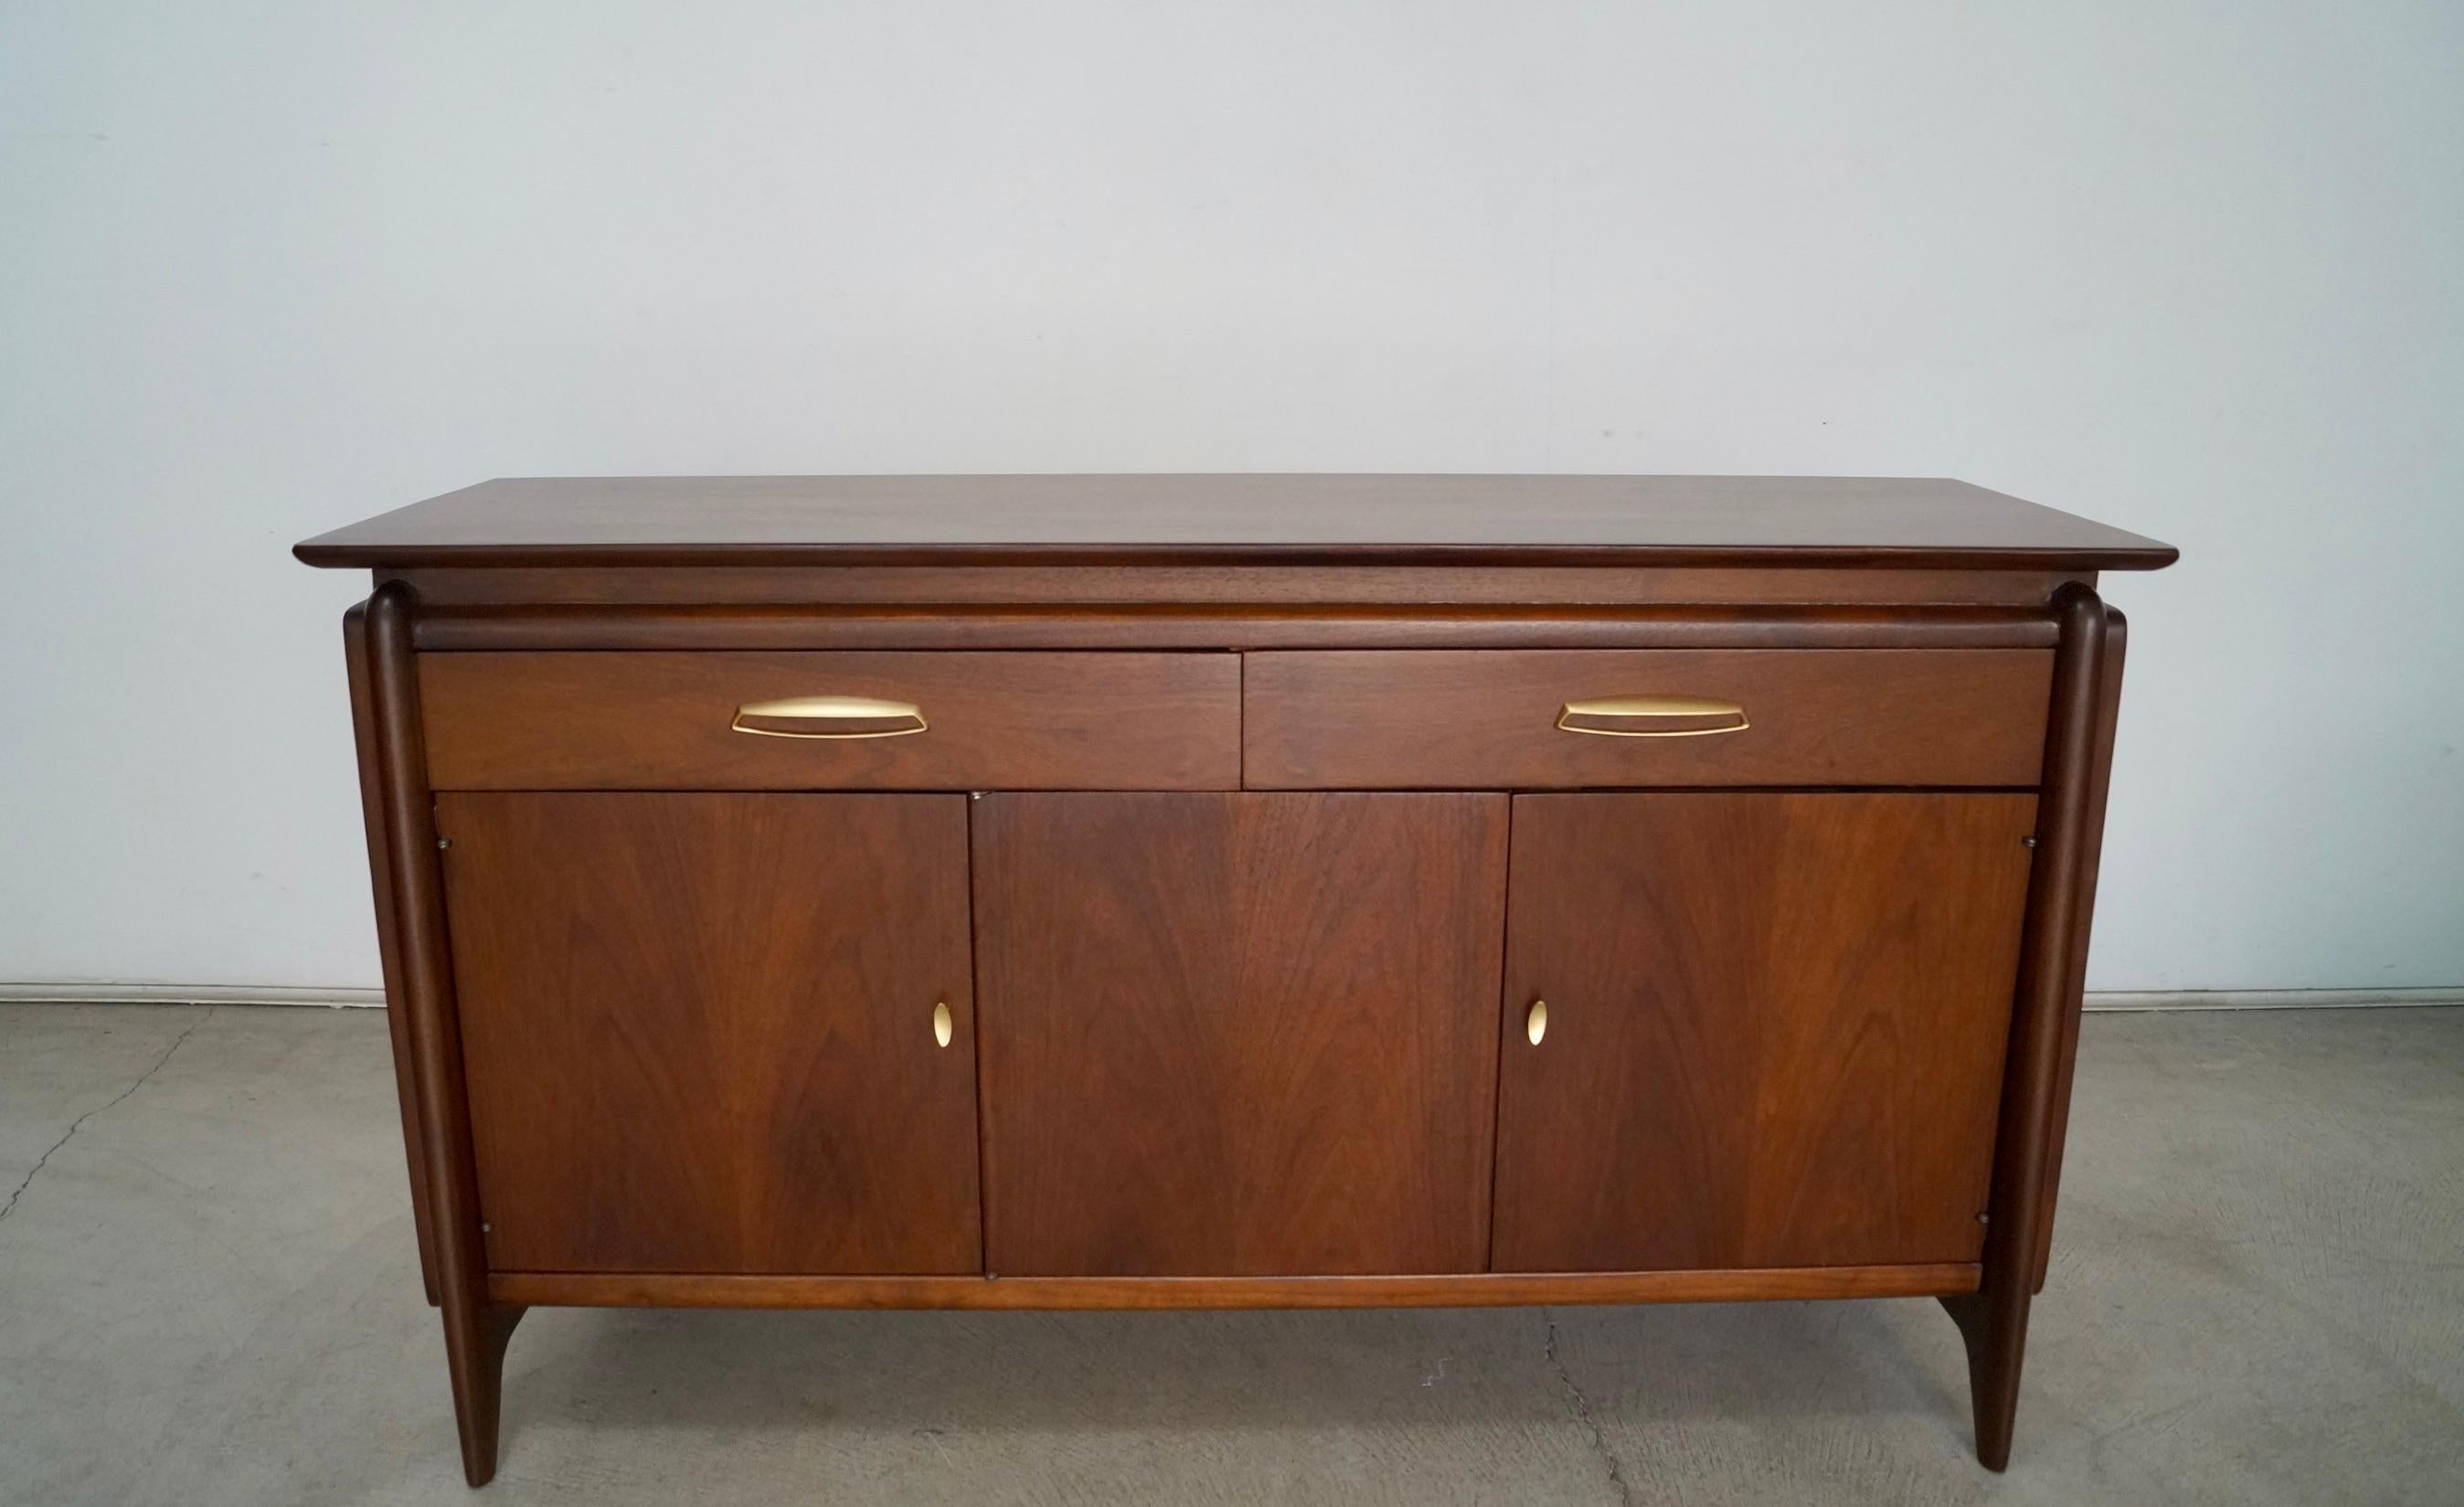 Vintage original Mid-century Modern sideboard for sale. Designed by John Van Koert for Drexel, and manufactured in 1959. It's part of the Projection series, and is beautifully designed. It's made of walnut, and has been professionally refinished. It